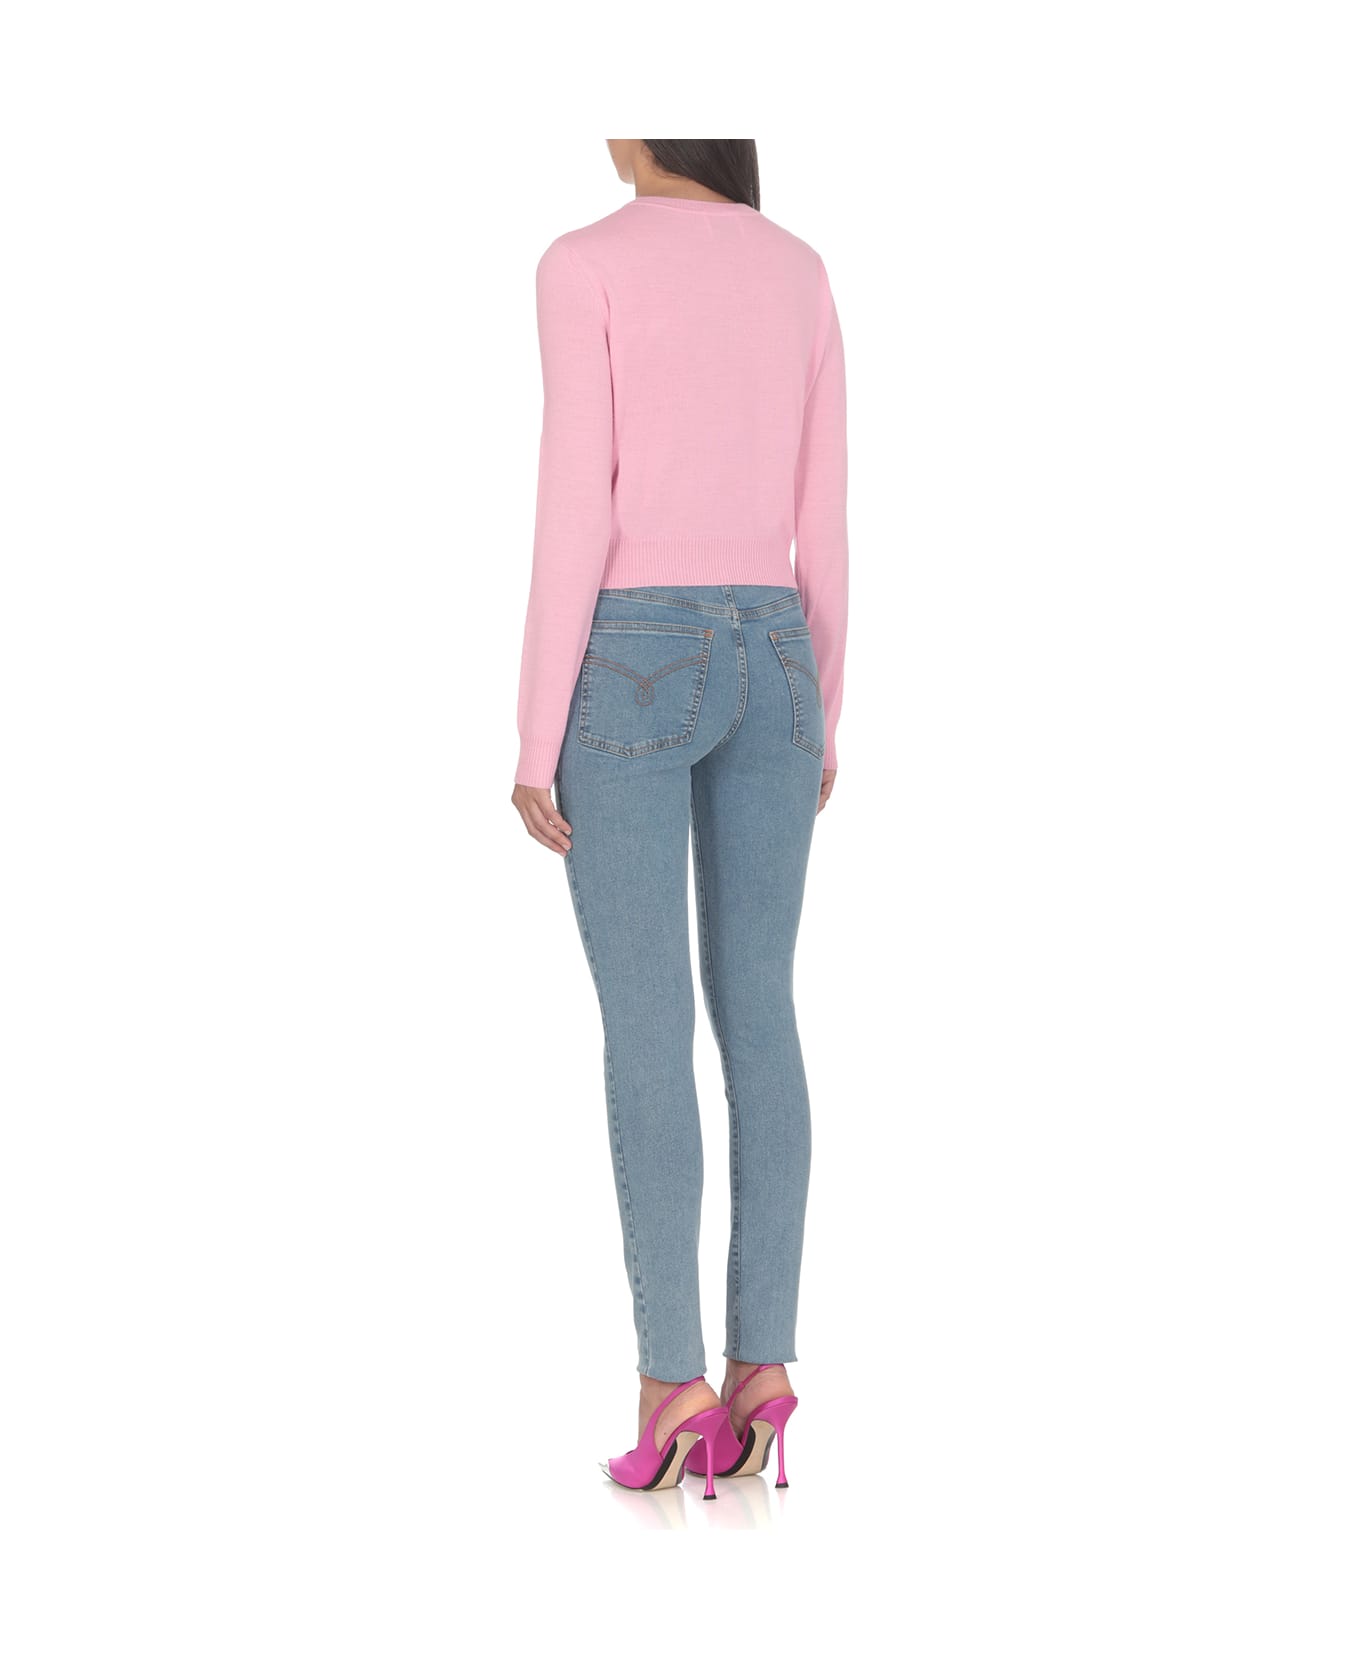 M05CH1N0 Jeans Sweater With Logo - PINK